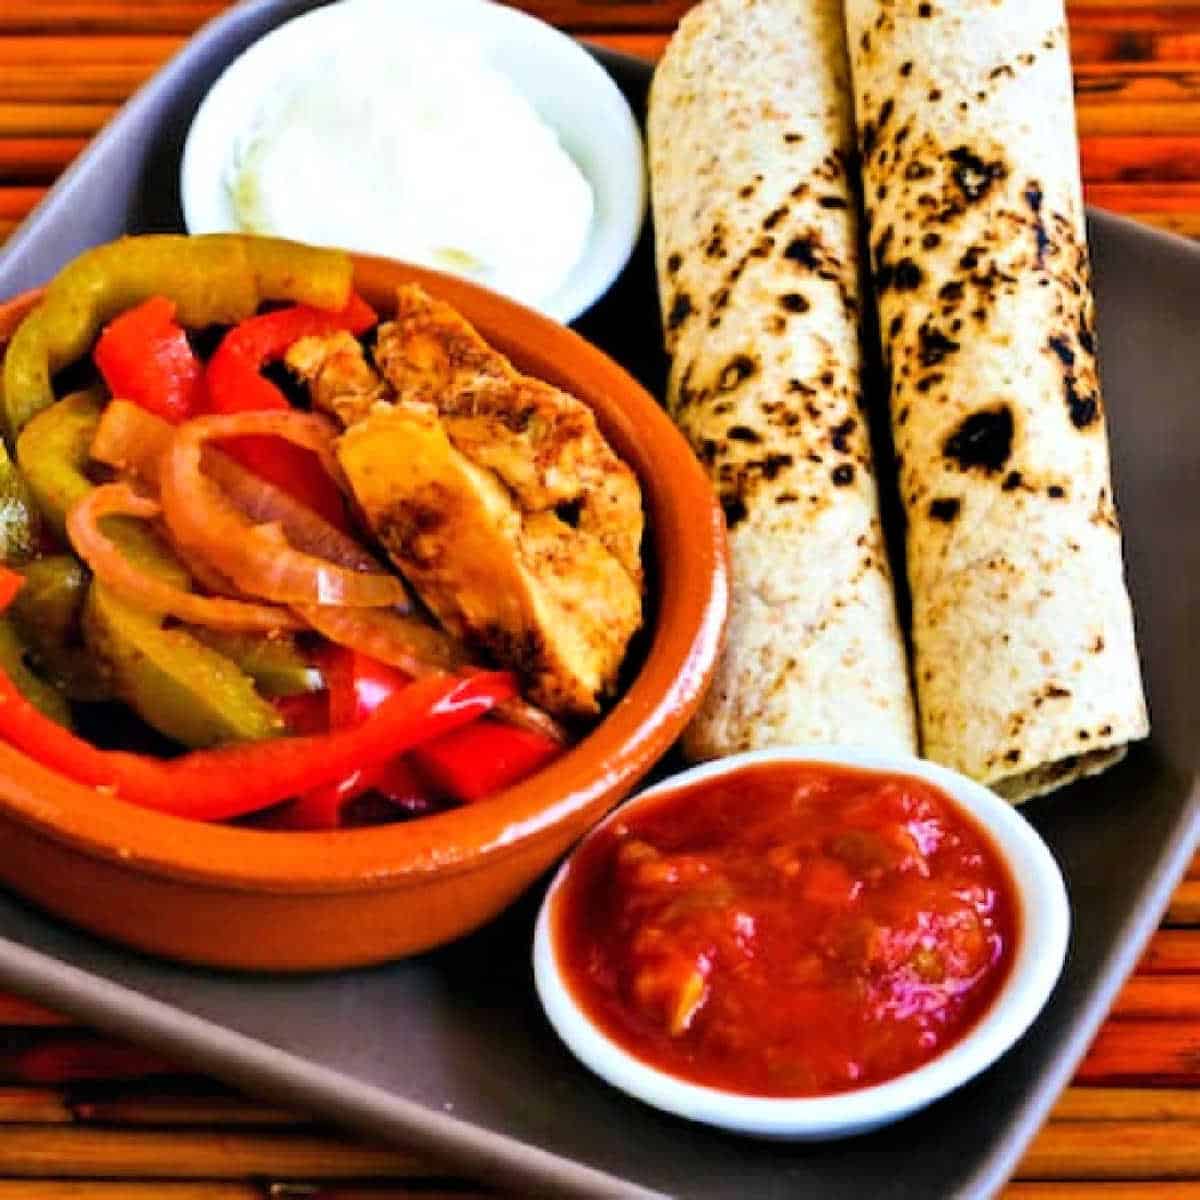 Slow cooker chicken fajitas shown in single servings on a square plate.